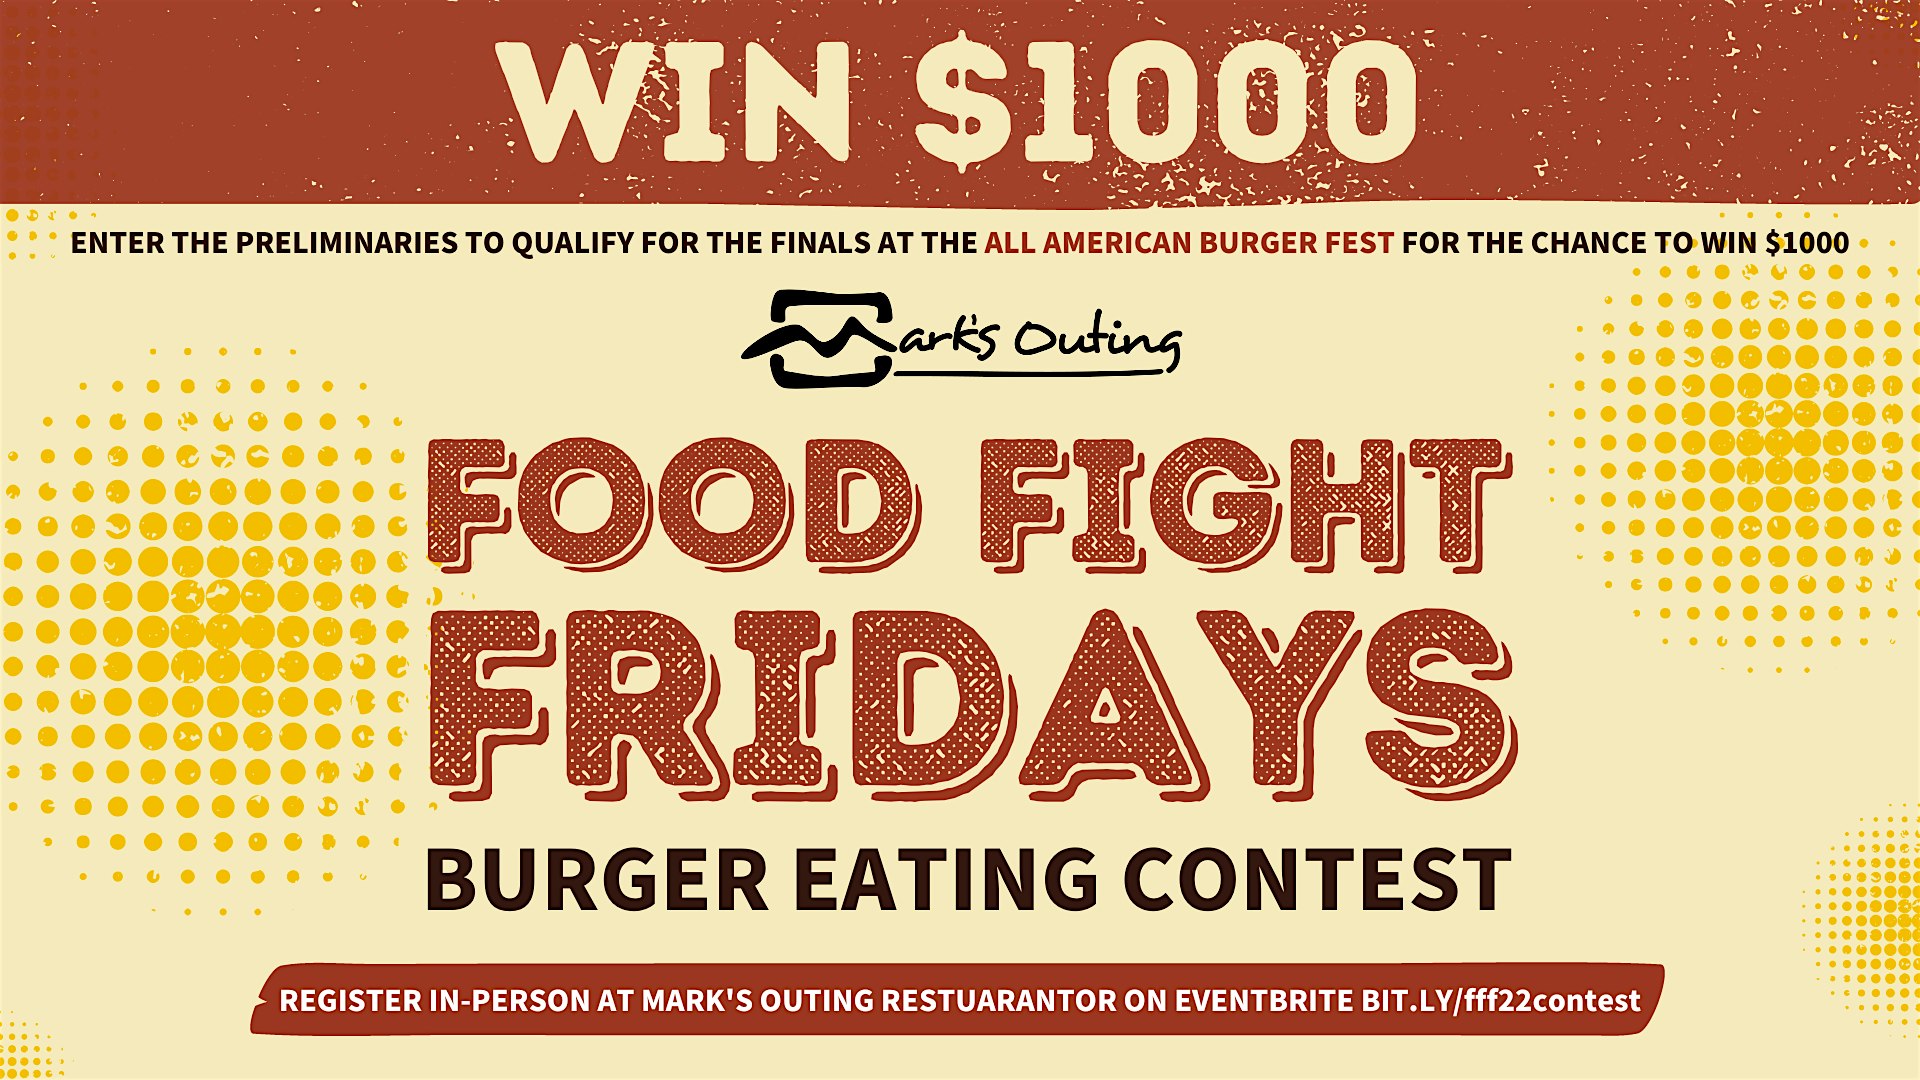 Mark's Outing FOOD FIGHT FRIDAYS: Burger Eating Contest